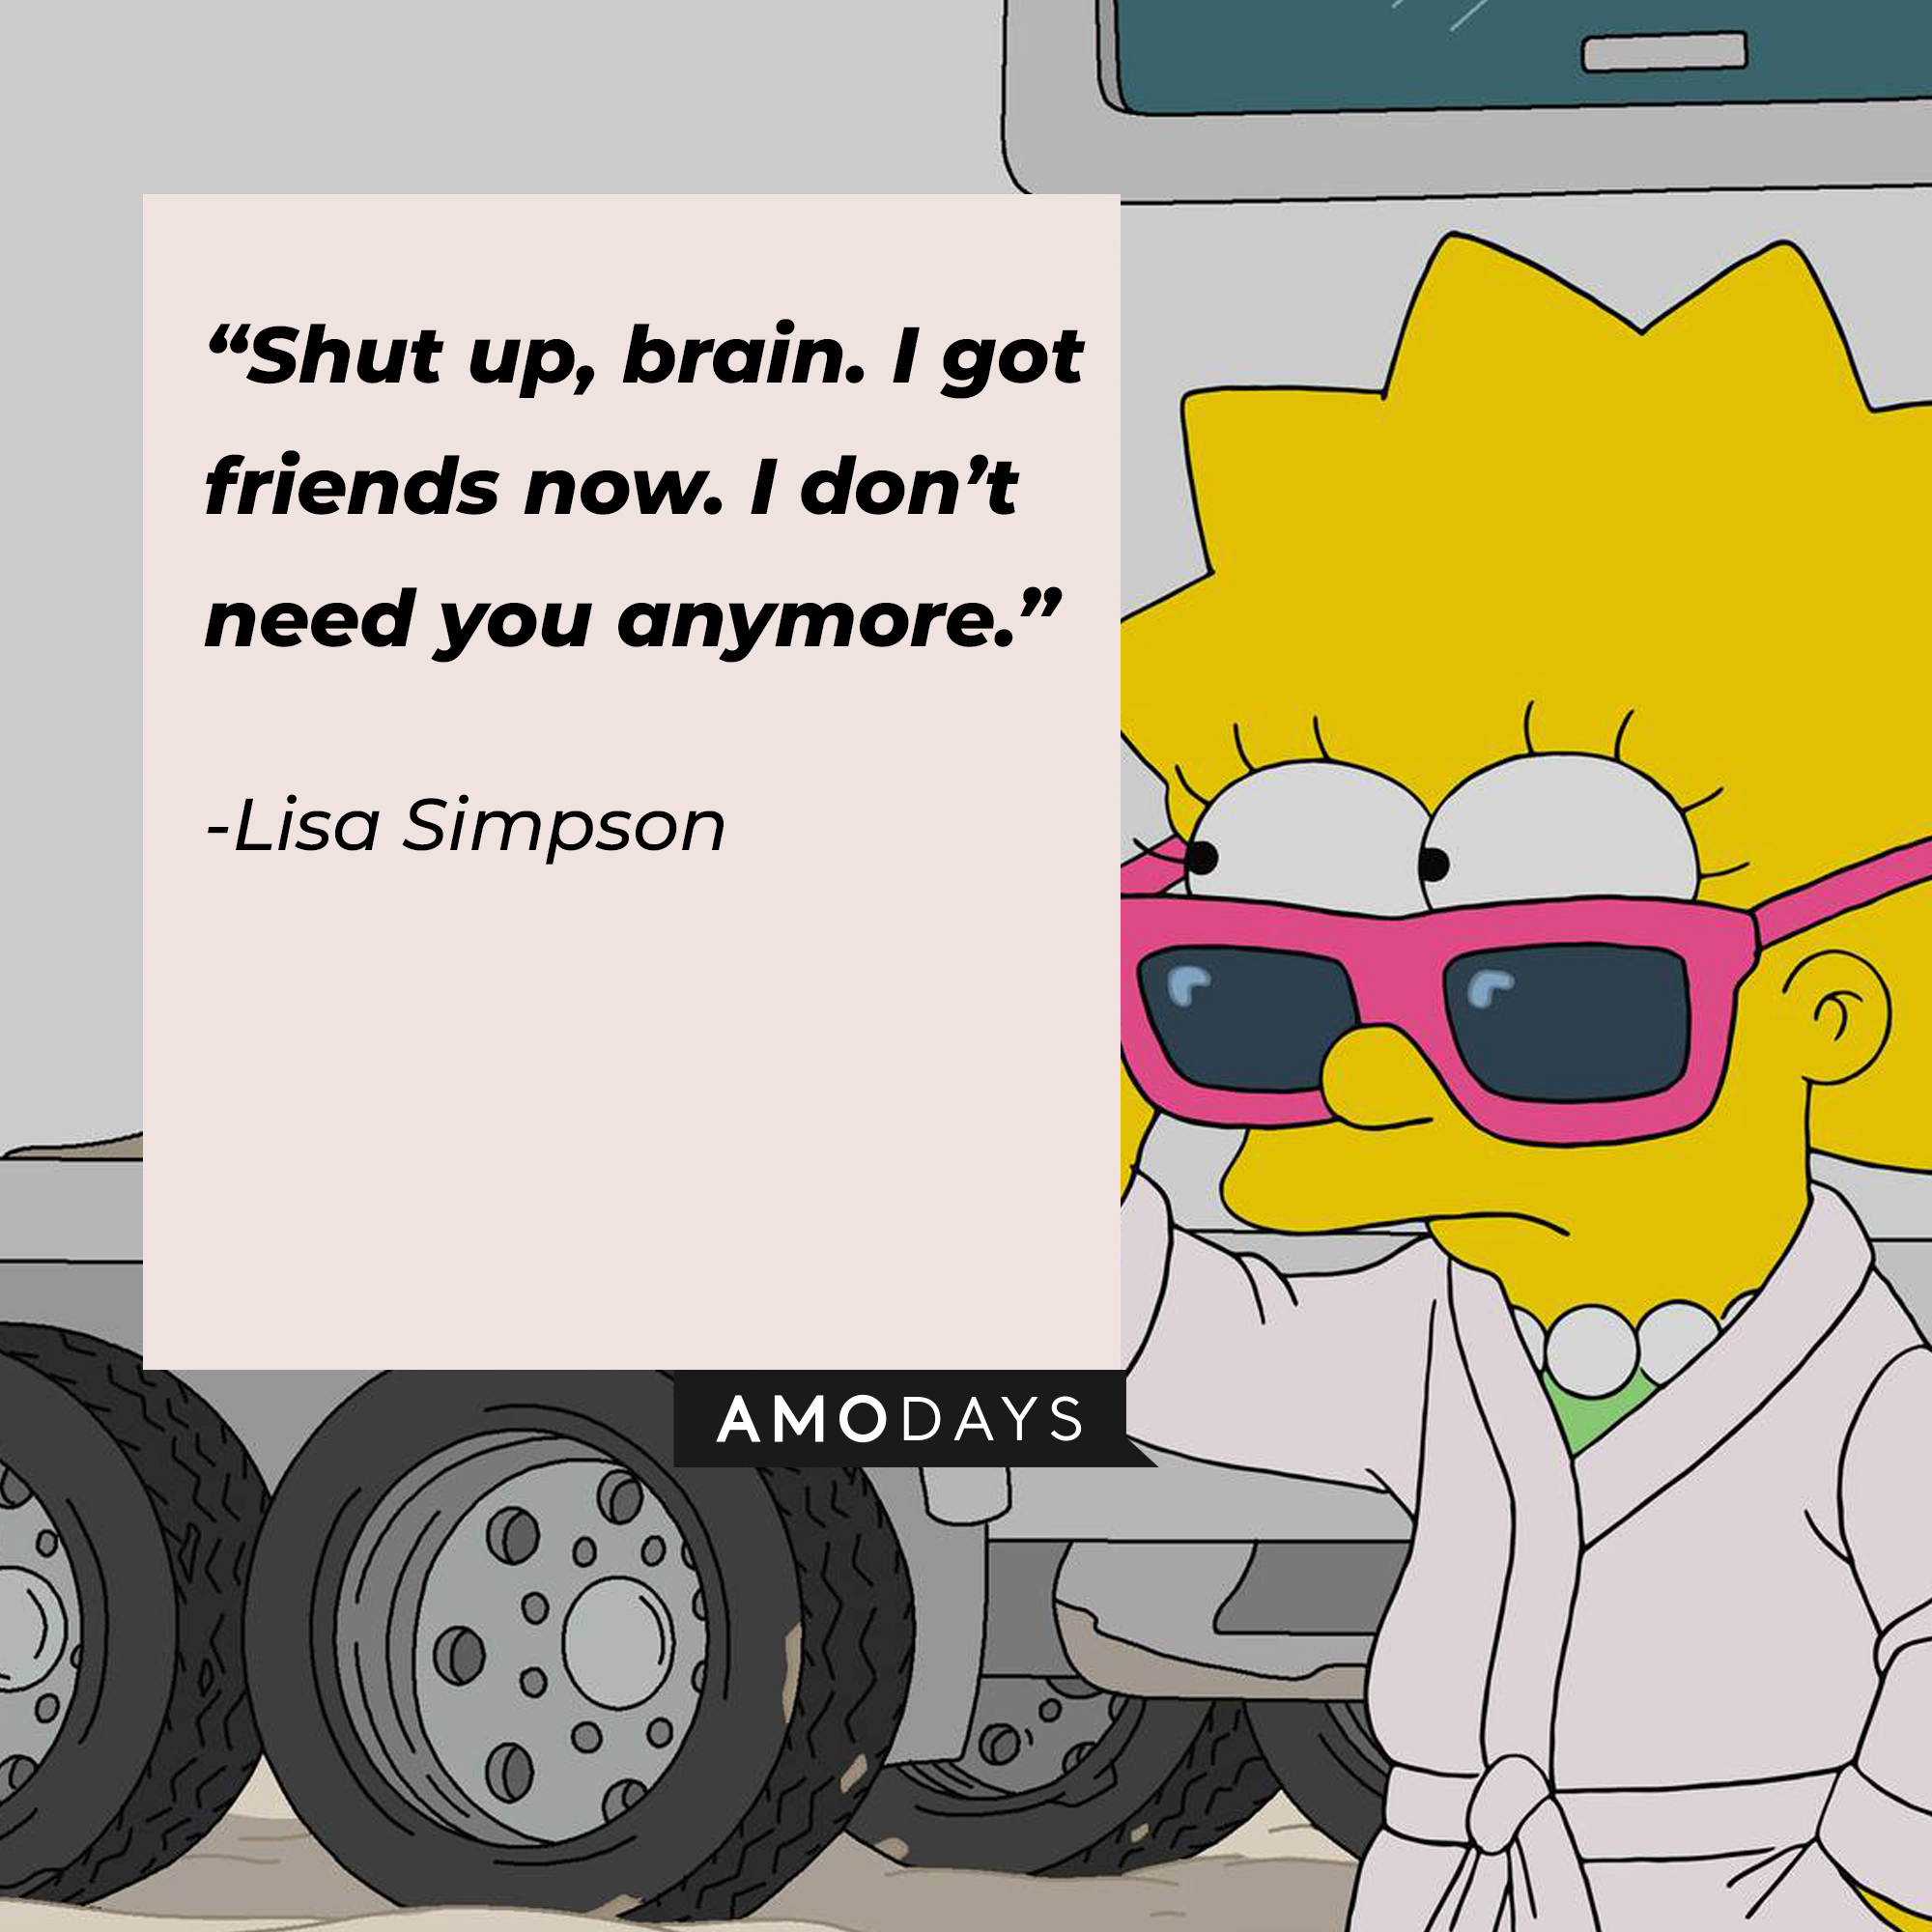 Lisa Simpson, with her quote: “Shut up, brain. I got friends now. I don’t need you anymore.”  | Source: facebook.com/TheSimpsons